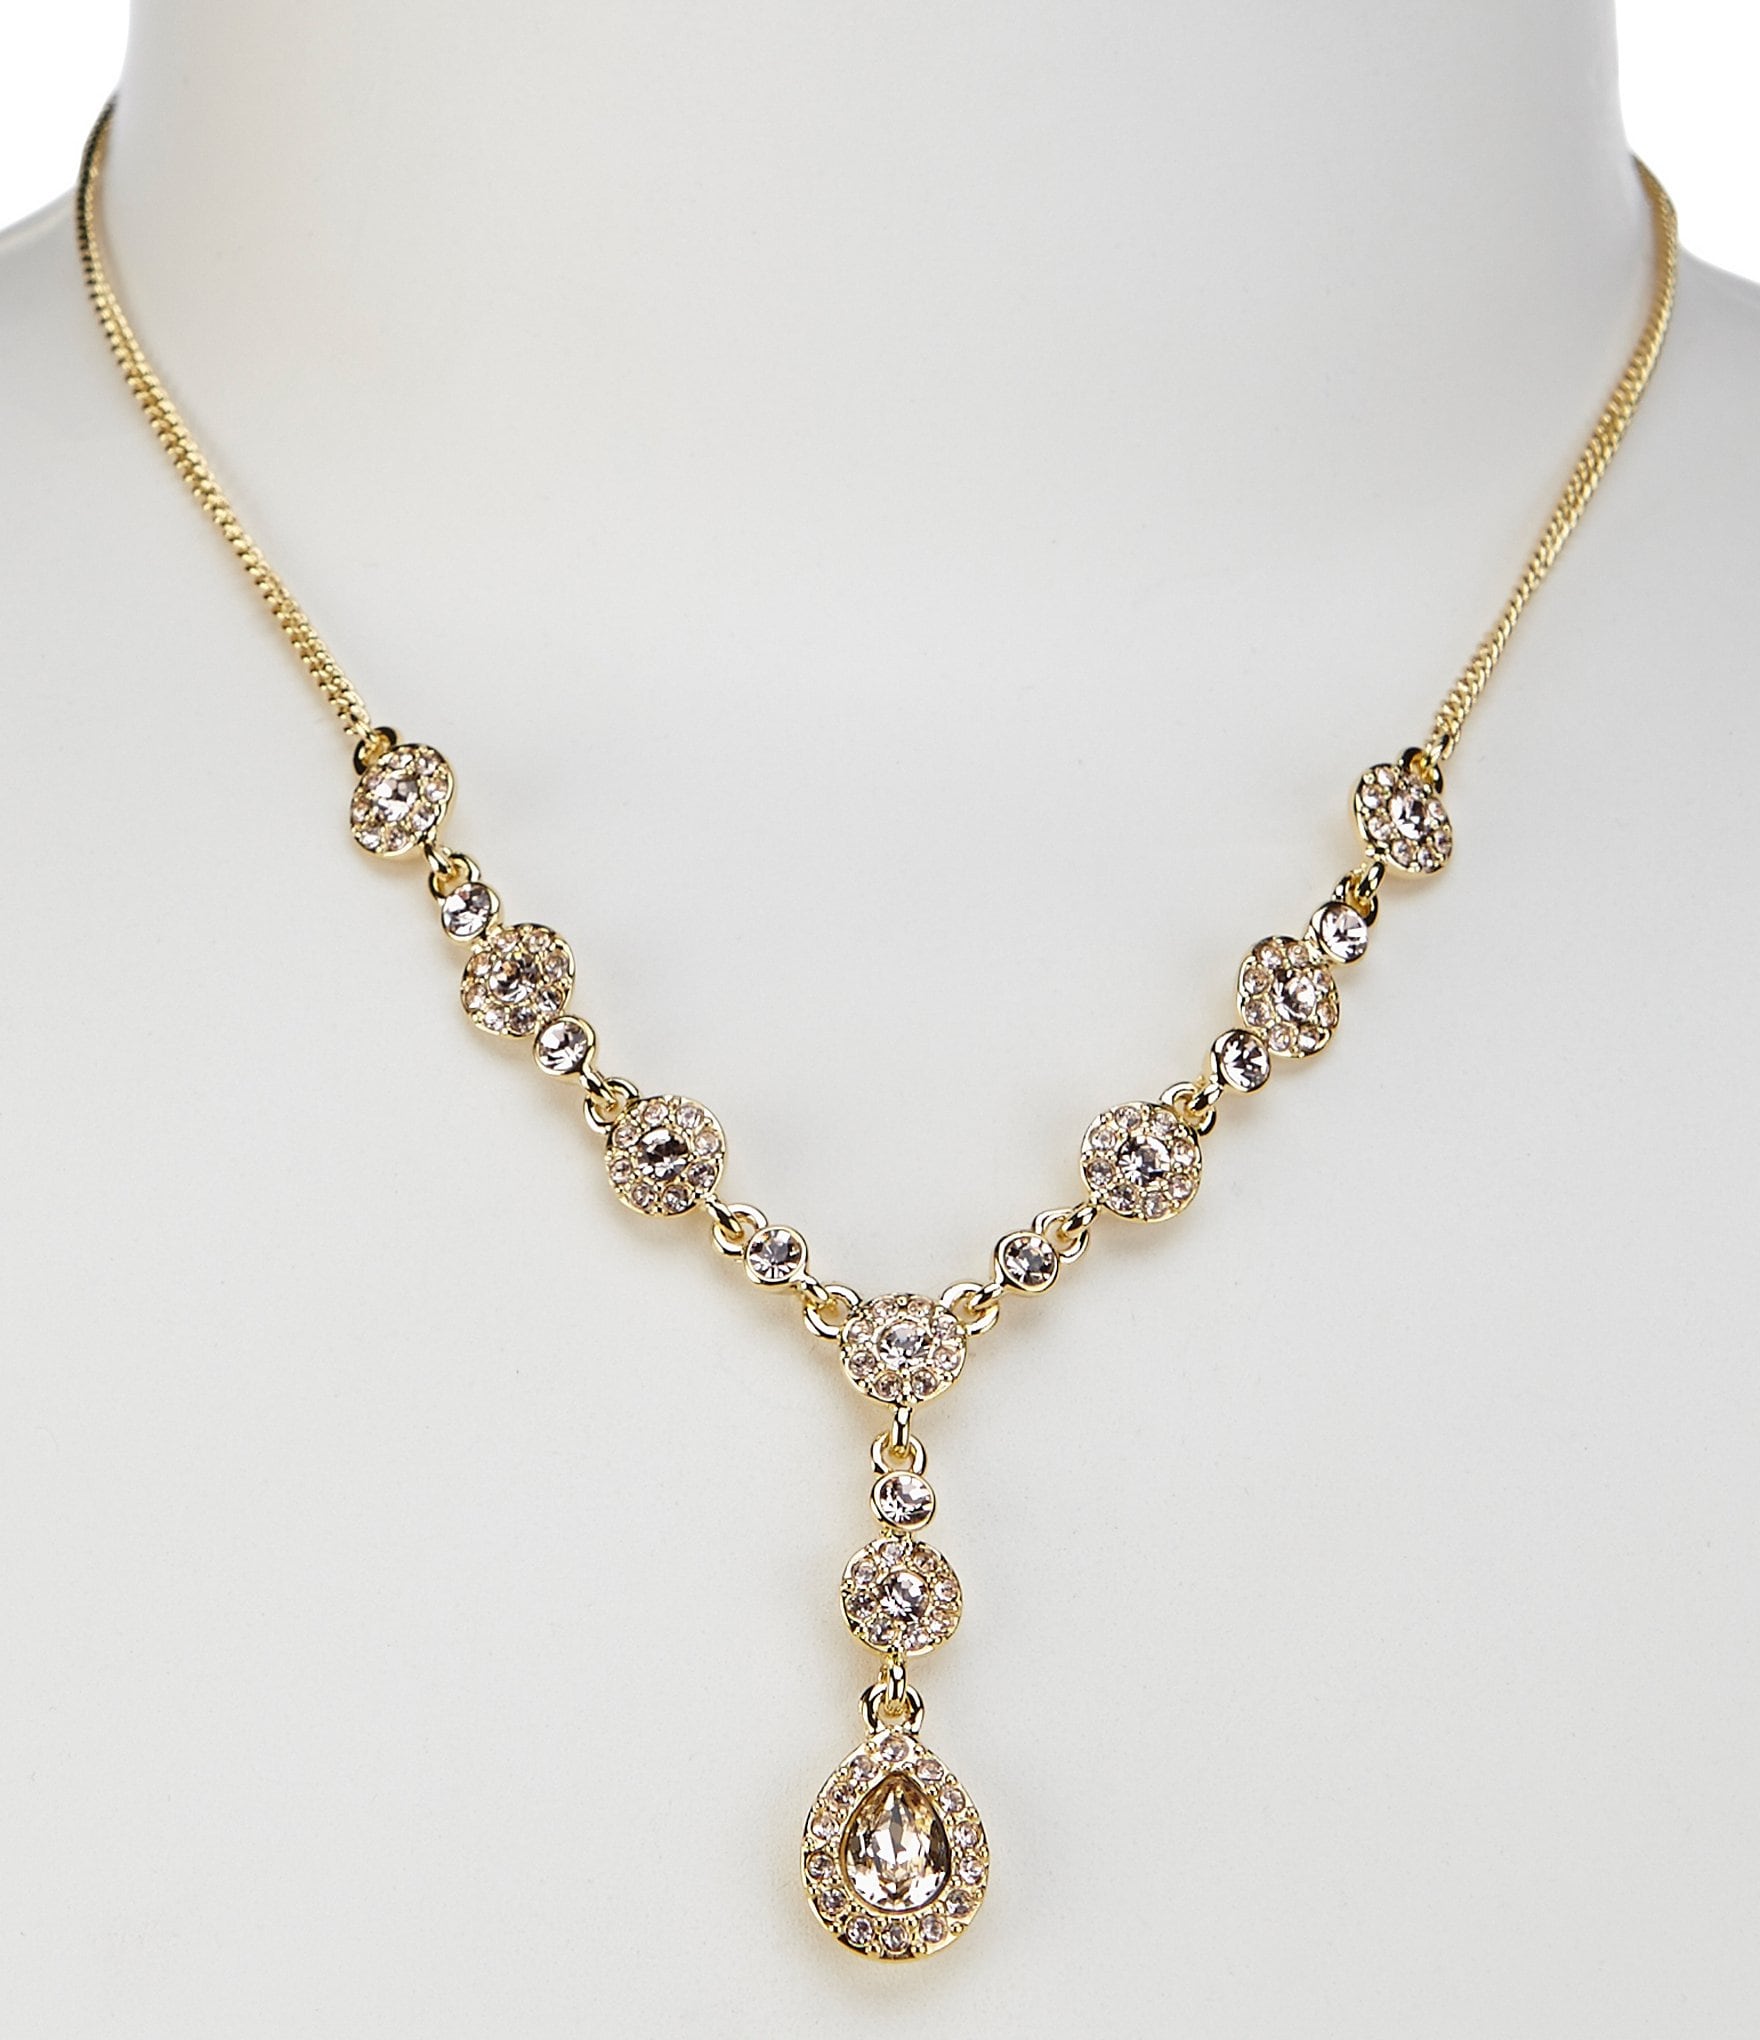 Givenchy Women's Necklaces | Dillard's